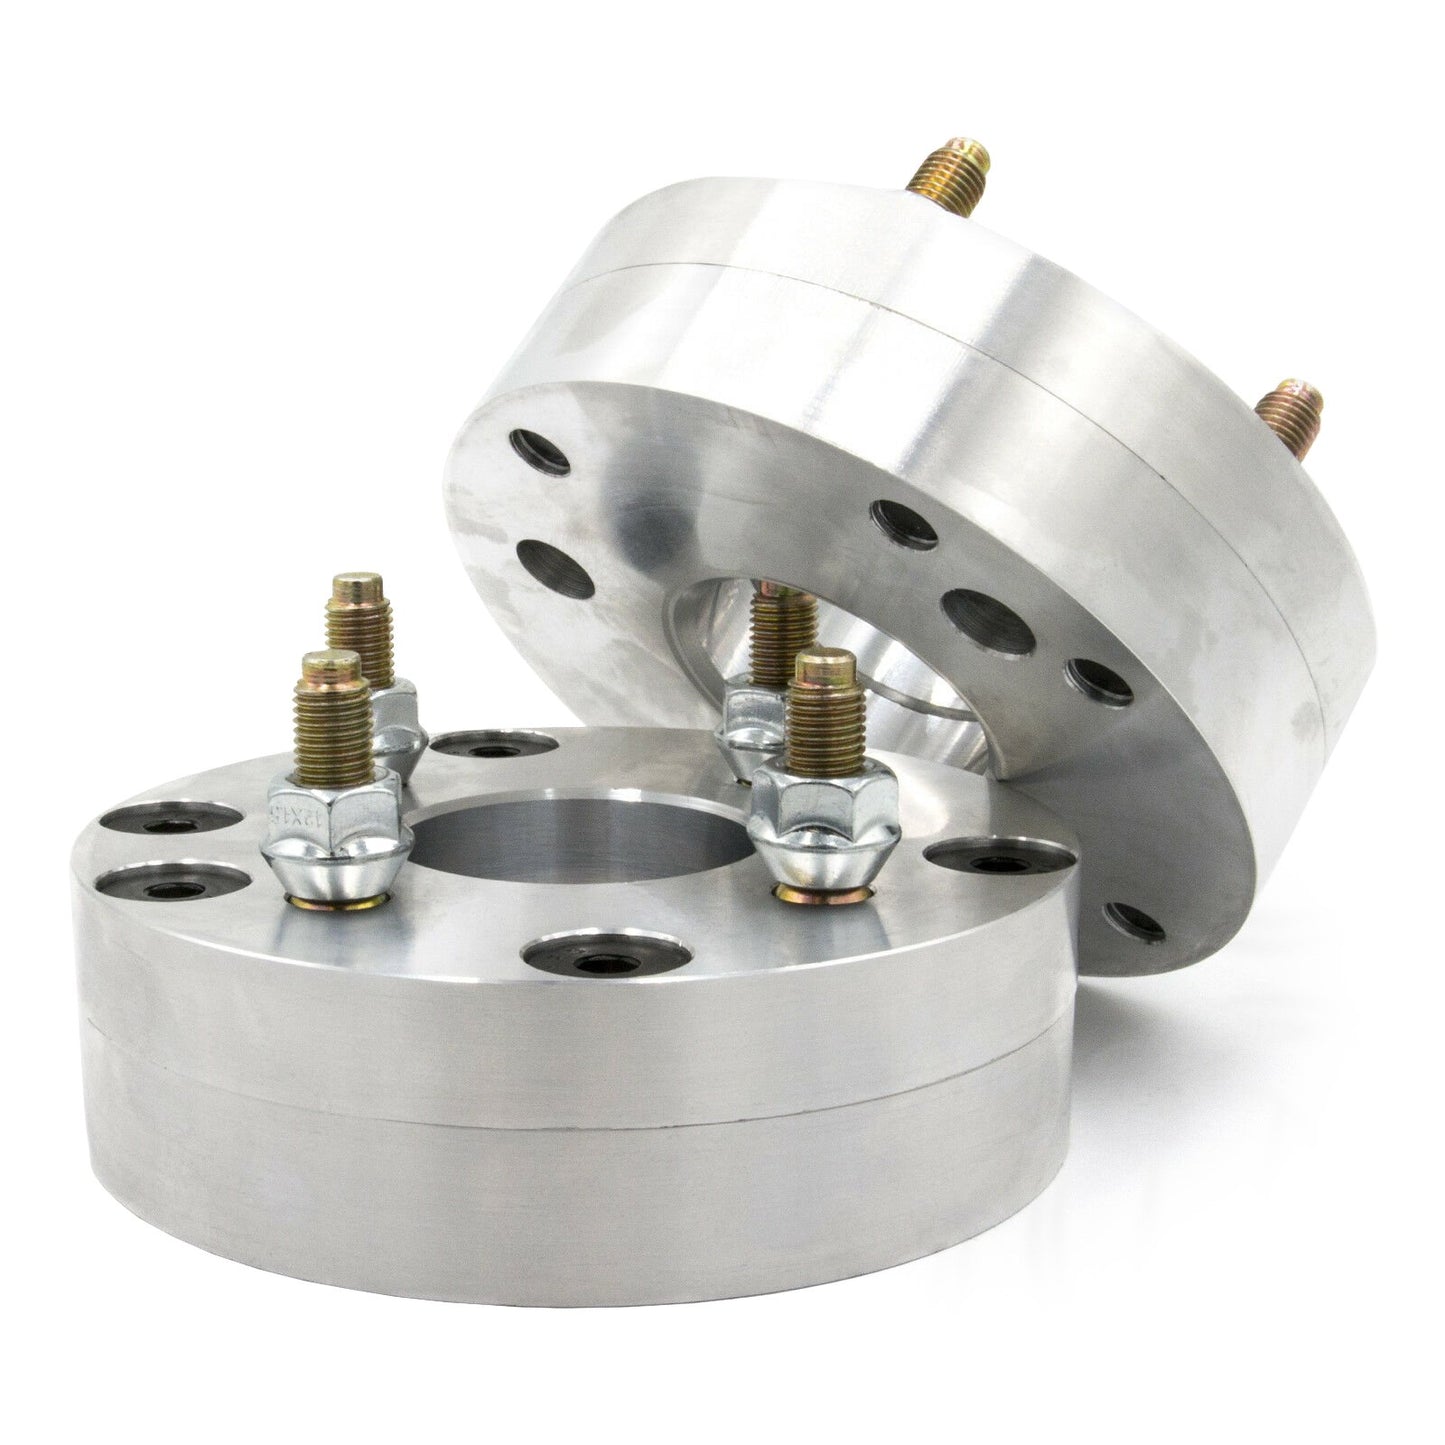 5x120 to 4x4.5" 2 piece Wheel Adapter - Thickness: 1.5" - 3"